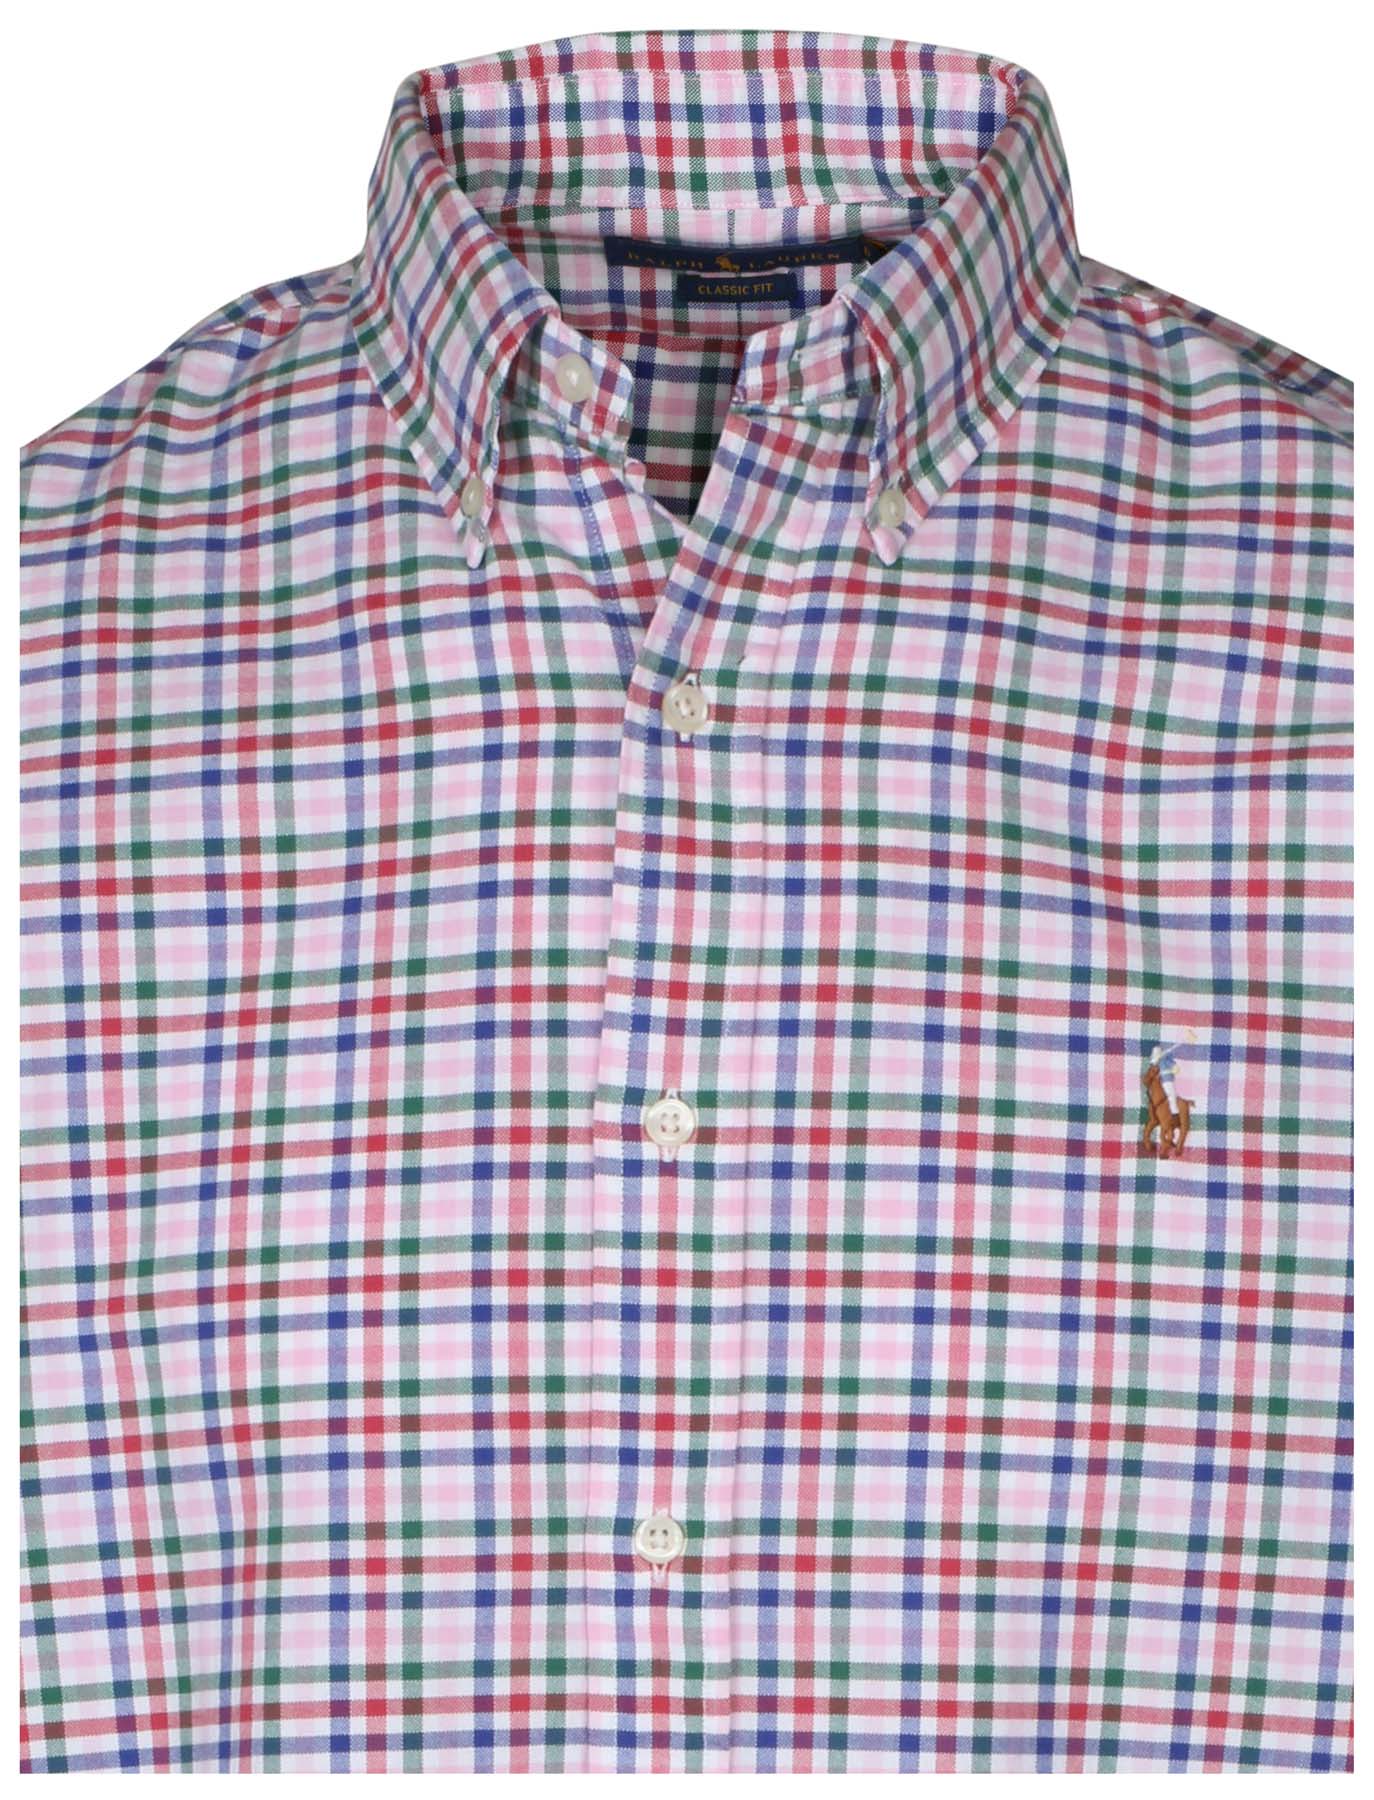 RL Men's Classic Fit Plaid Oxford Button Down Shirt (Small, Pink) - image 2 of 3